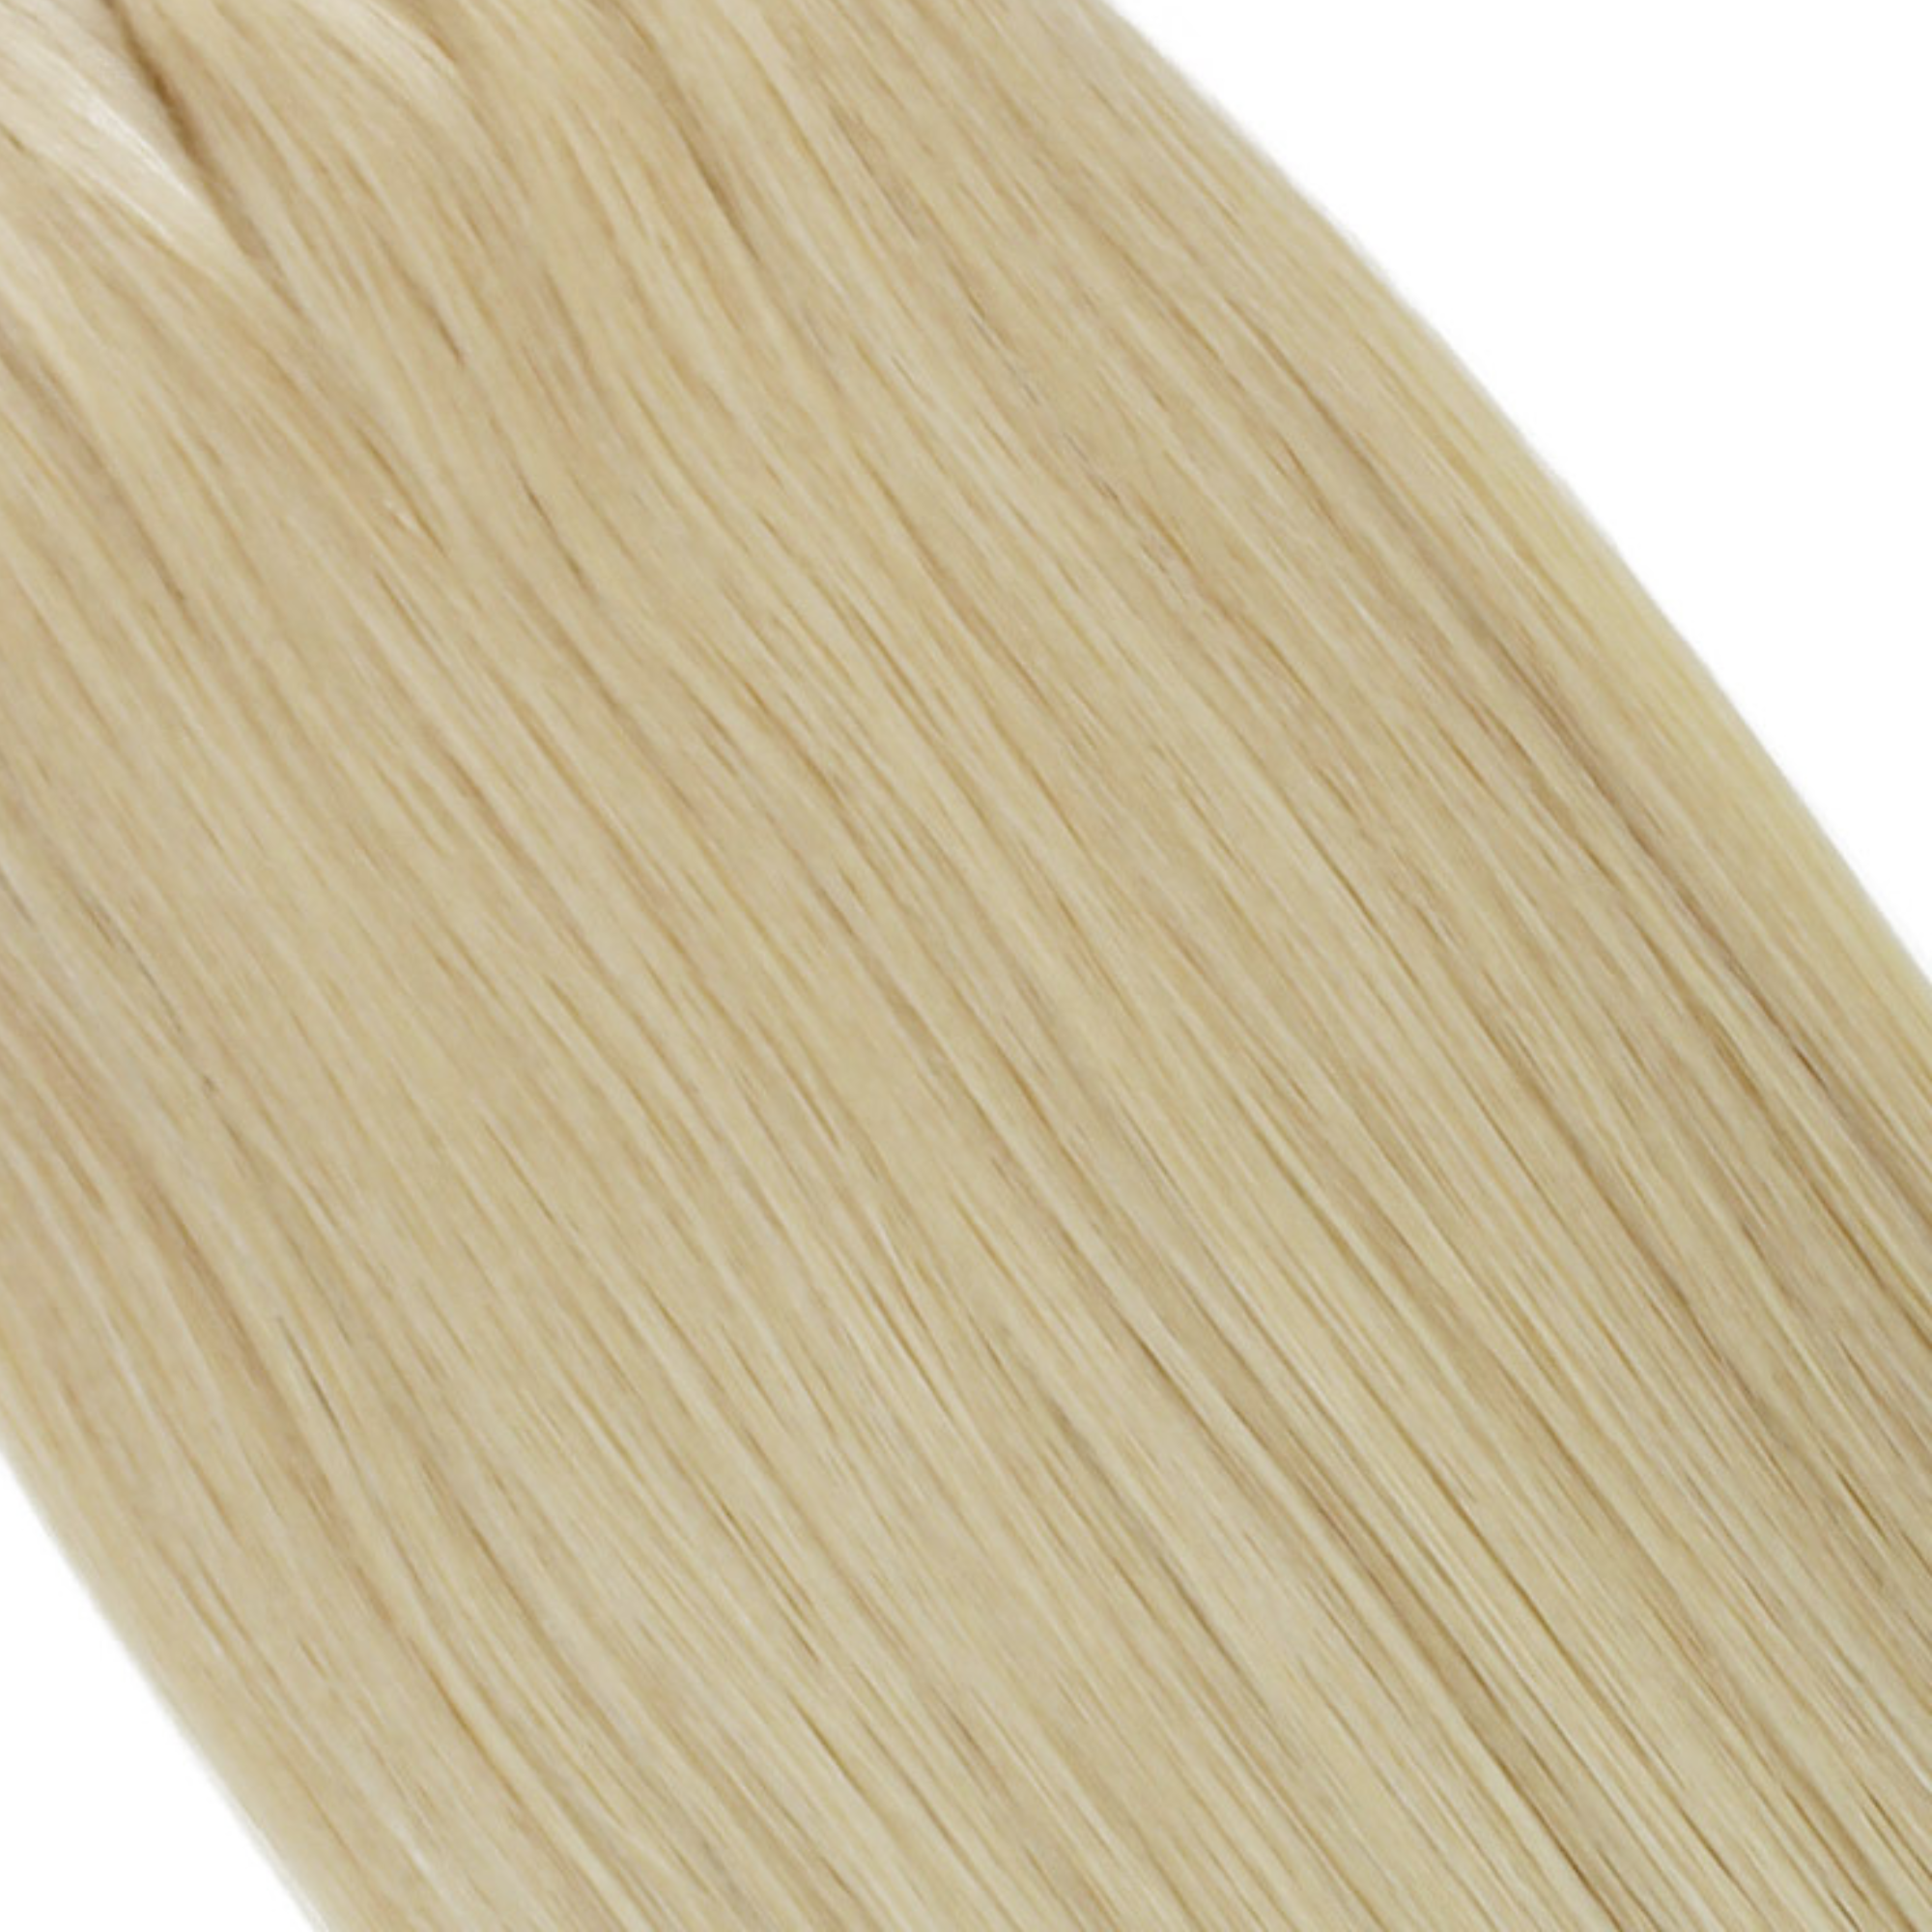 "hair rehab london 20" length 180 grams weight luxe clip-in hair extensions shade titled platinum"